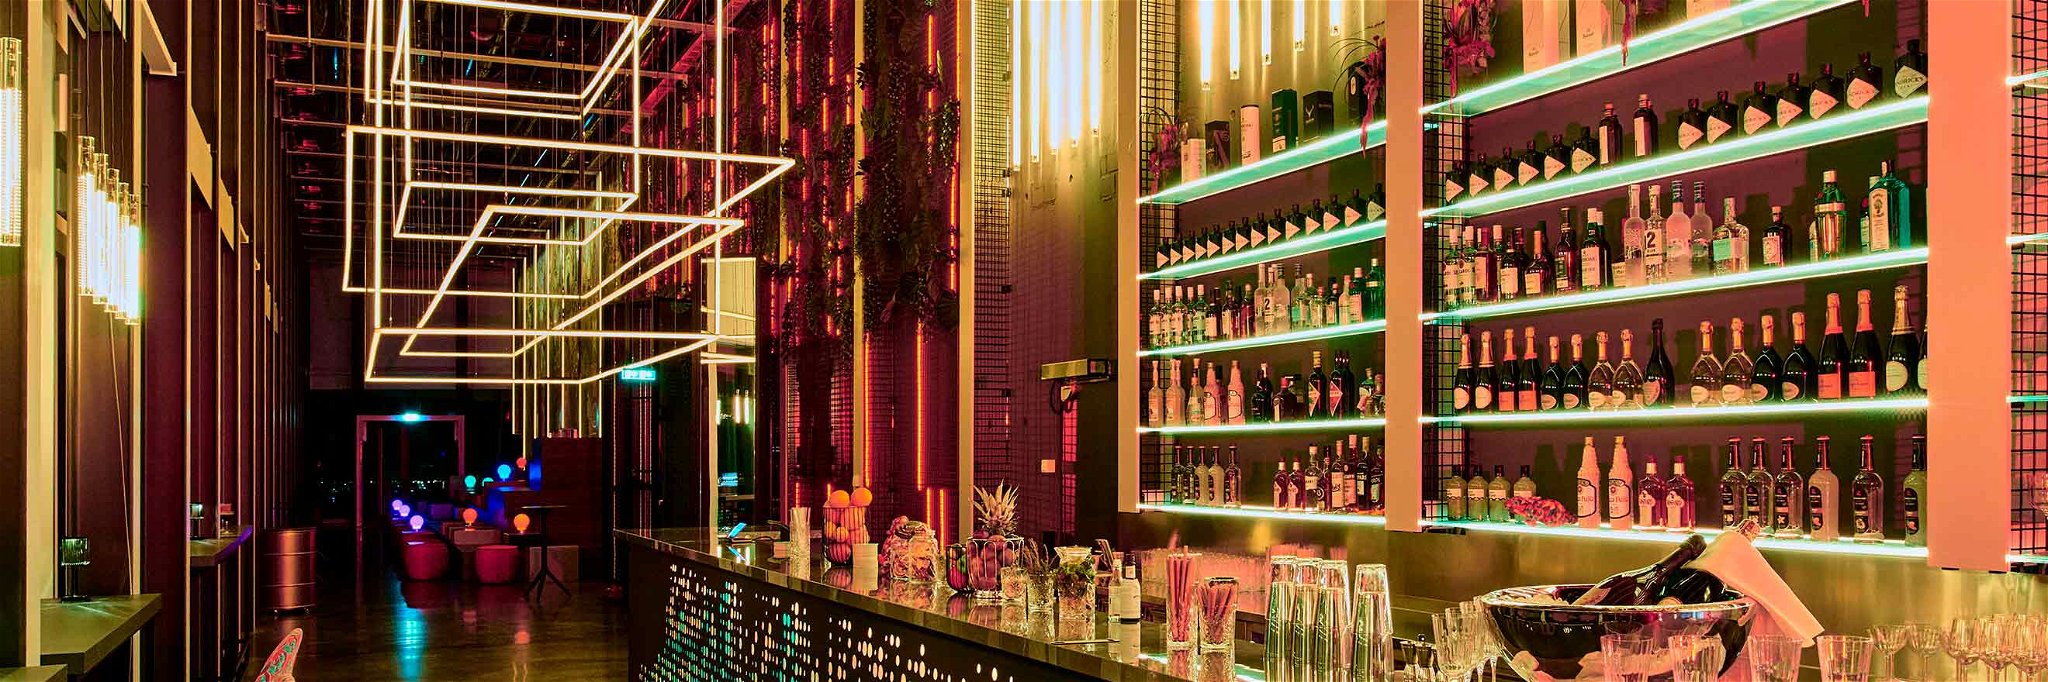 Customers can buy non-fungible tokens as well as drinks at NFT Skybar in Frankfurt.